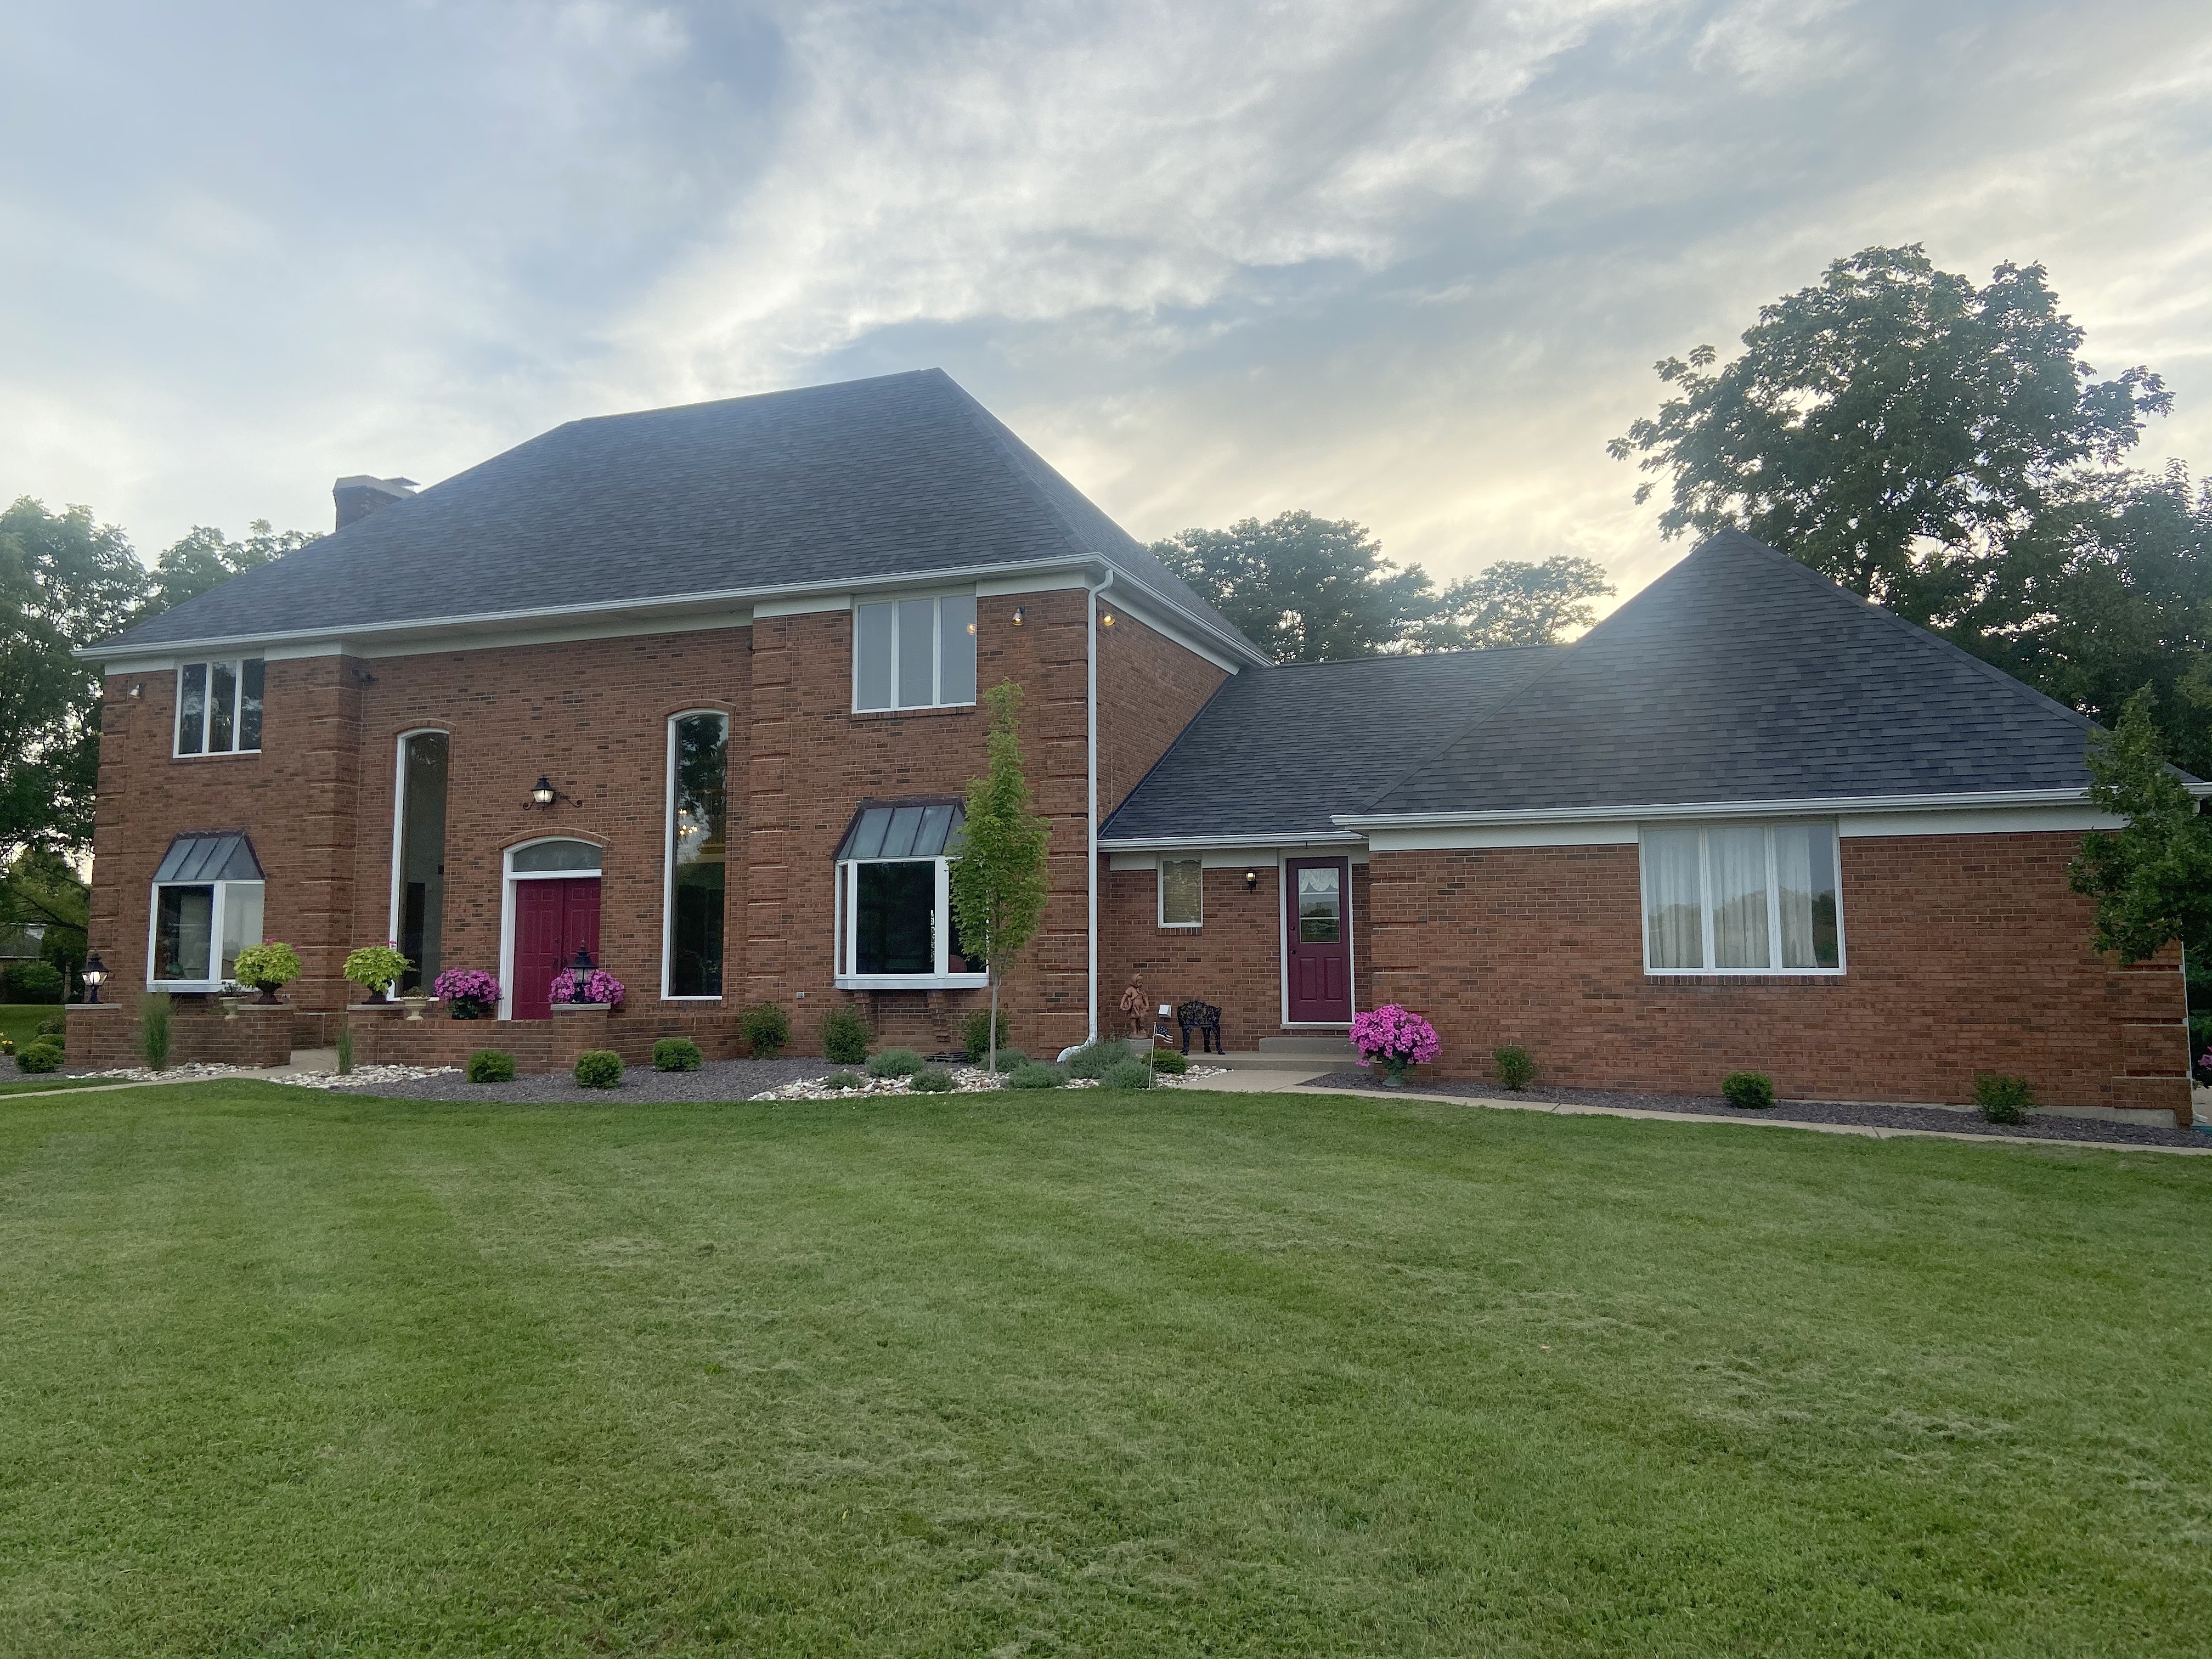 4 Bedrooms / 4.5 Bathrooms - Est. $2,835.00 / Month* for rent in Quincy, IL